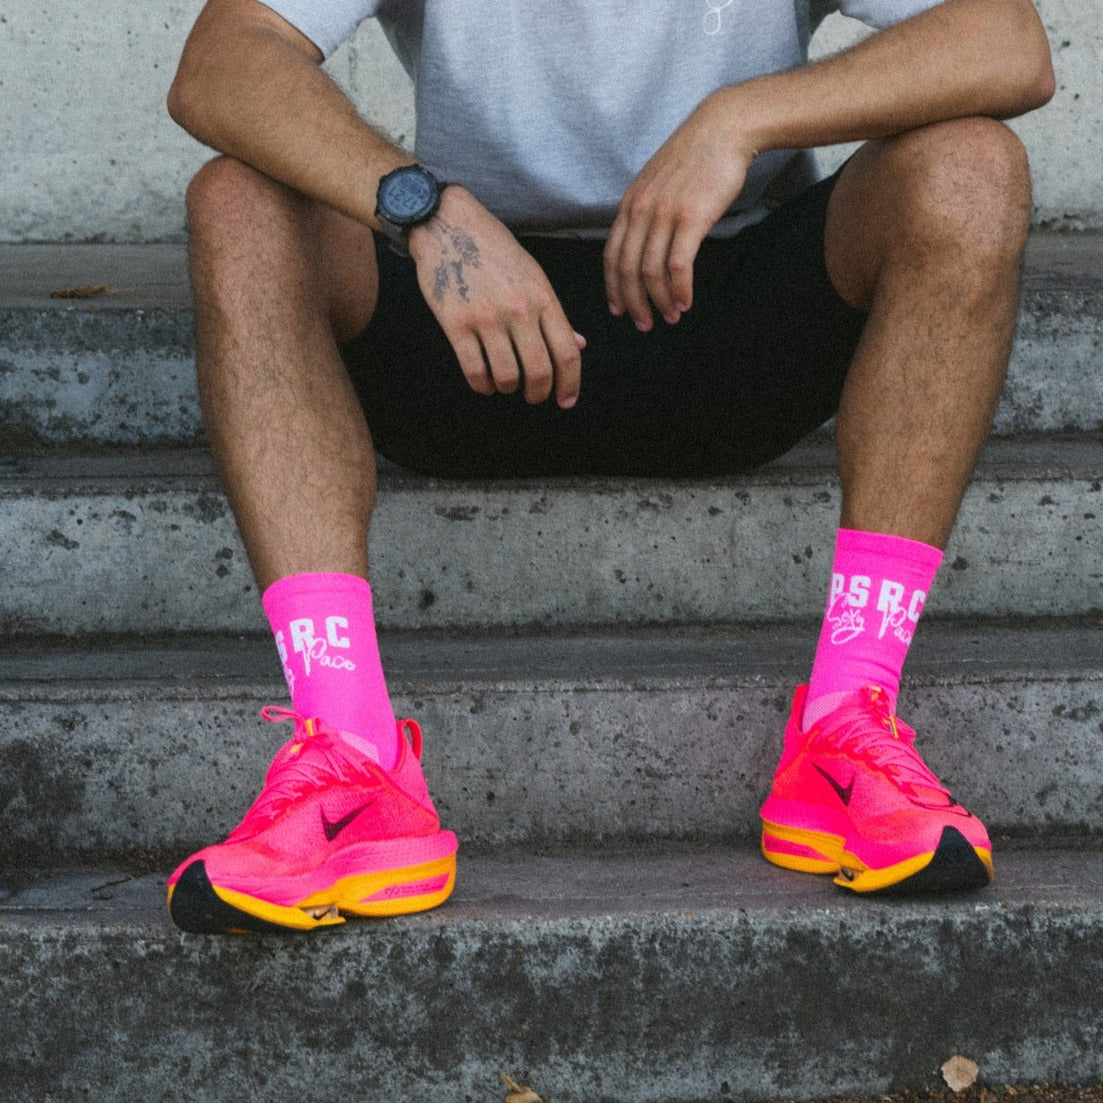 Performance Sexy Pace Socks - Pink